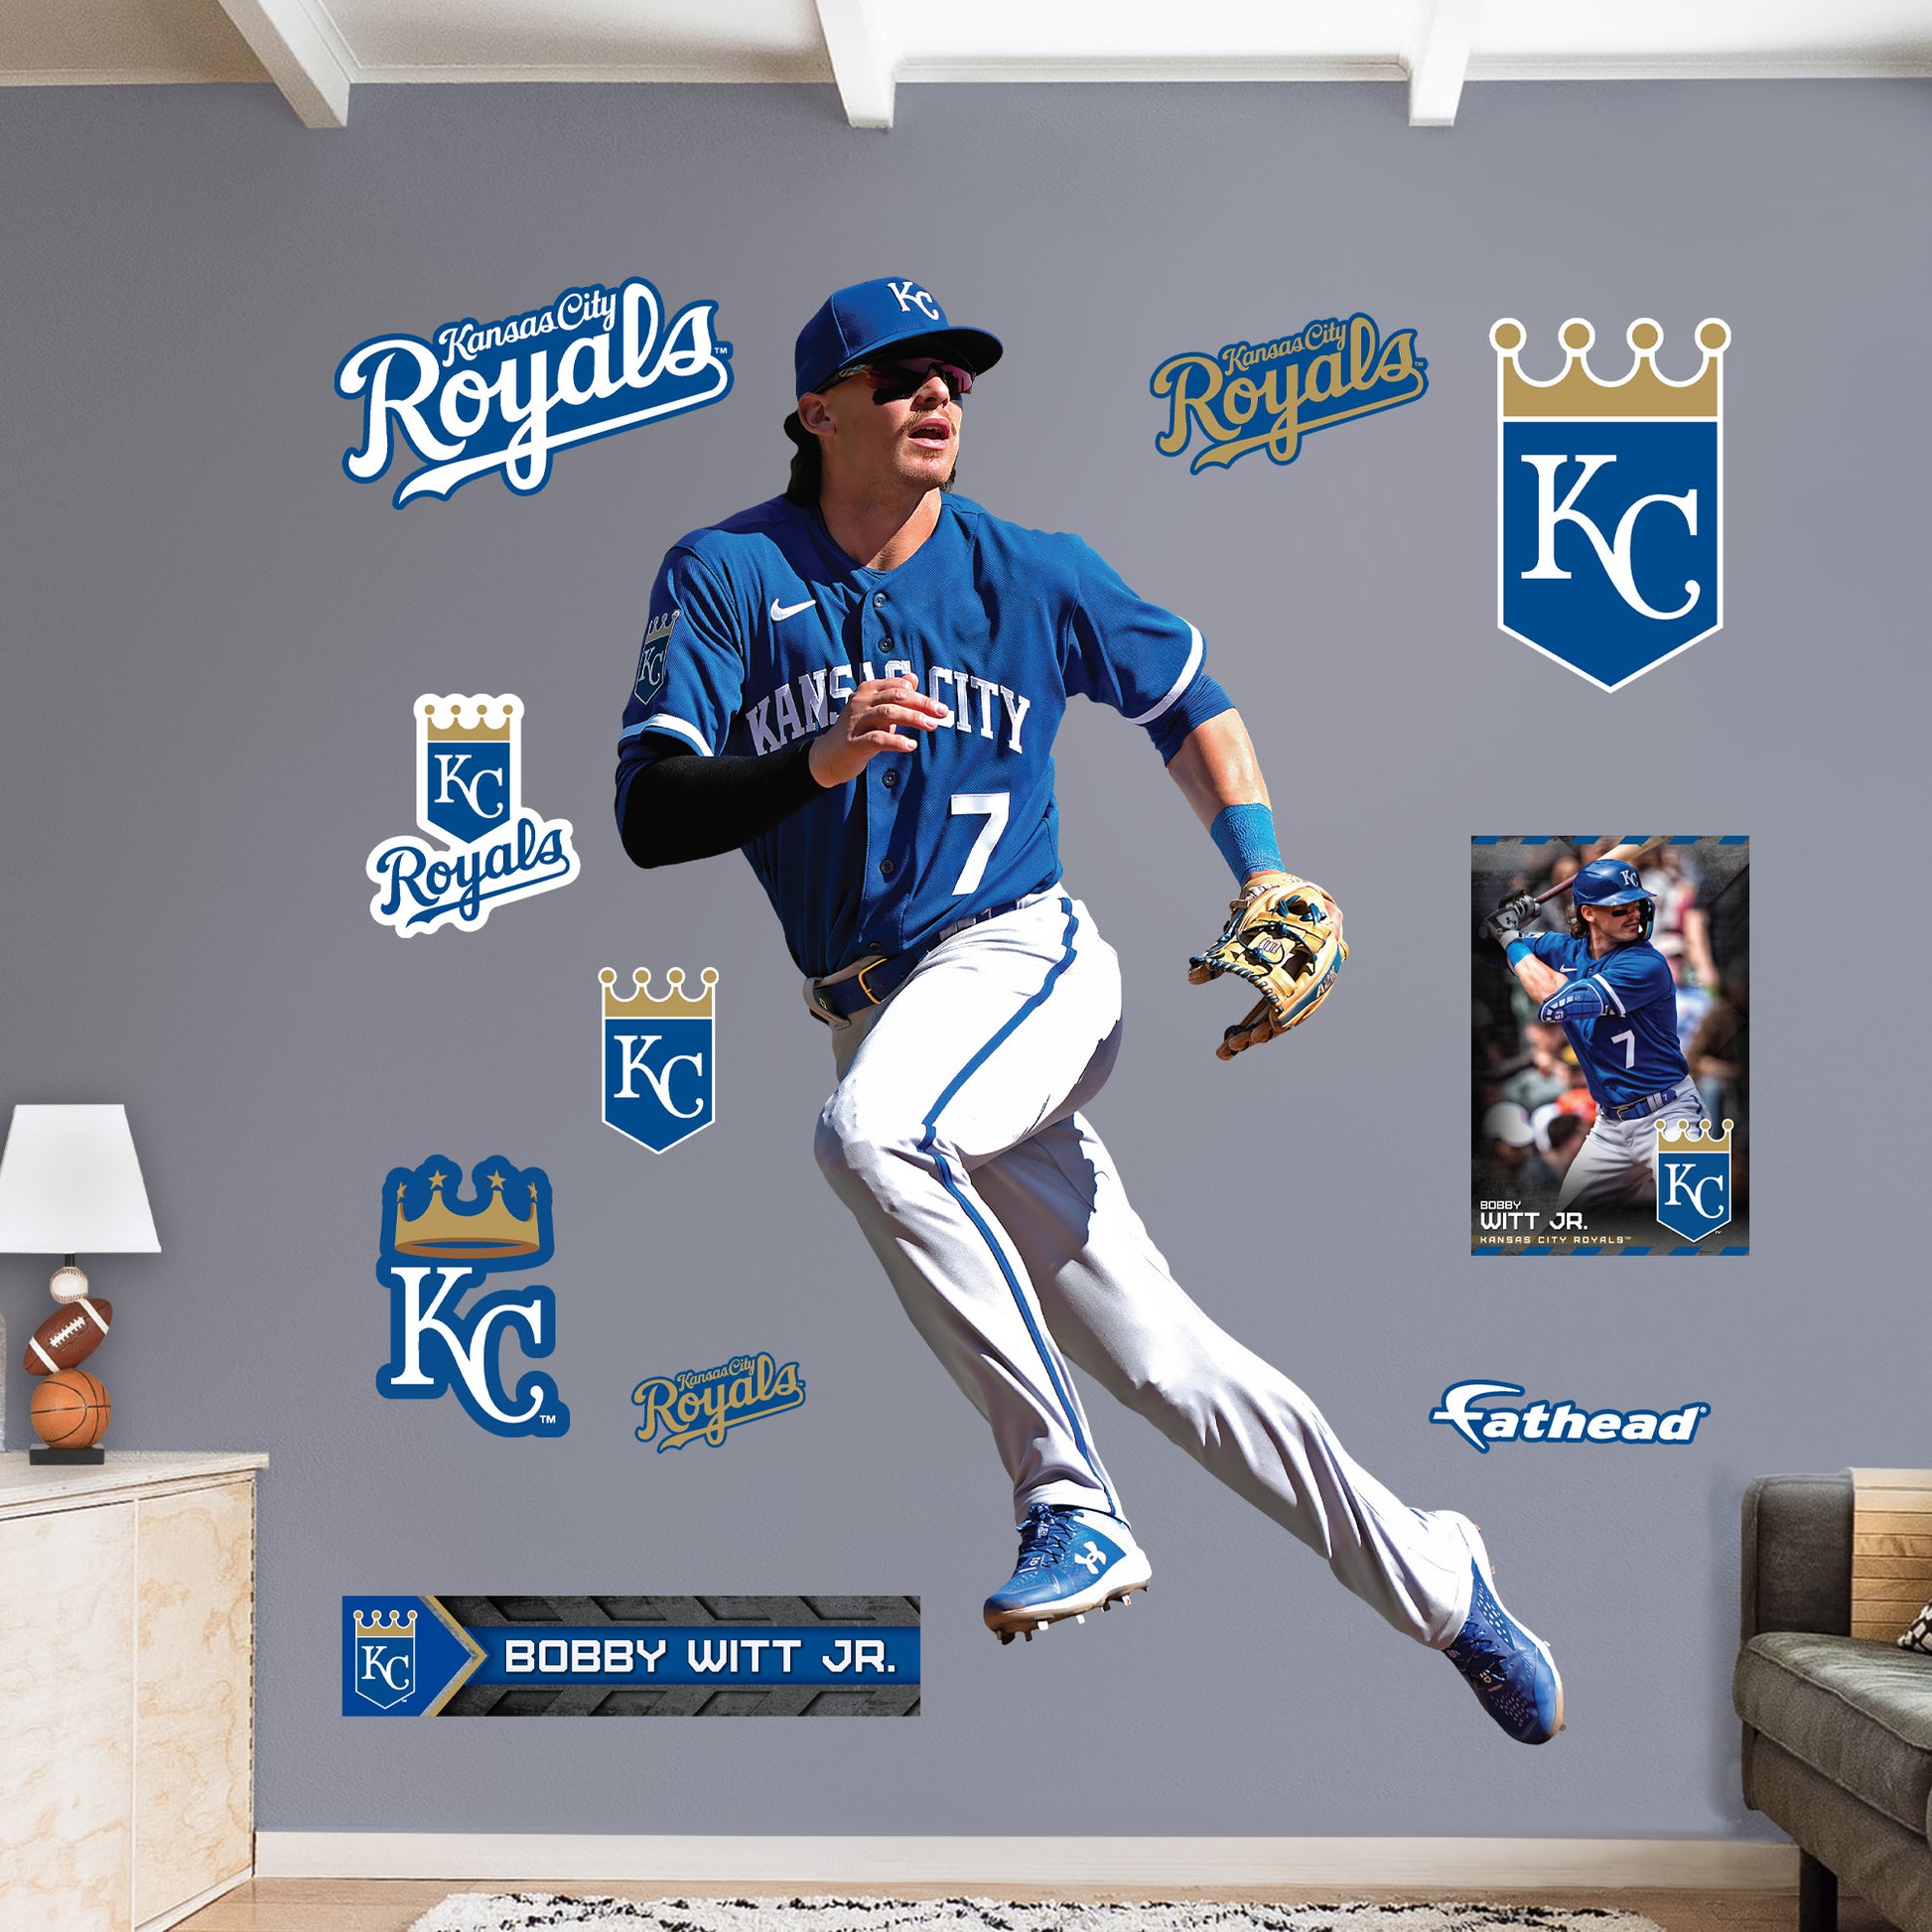 Fathers Day Gift for Dad Kansas City Royals gift kc royals fan Gifts for  Him - Kansas City Art kc royals dads gift